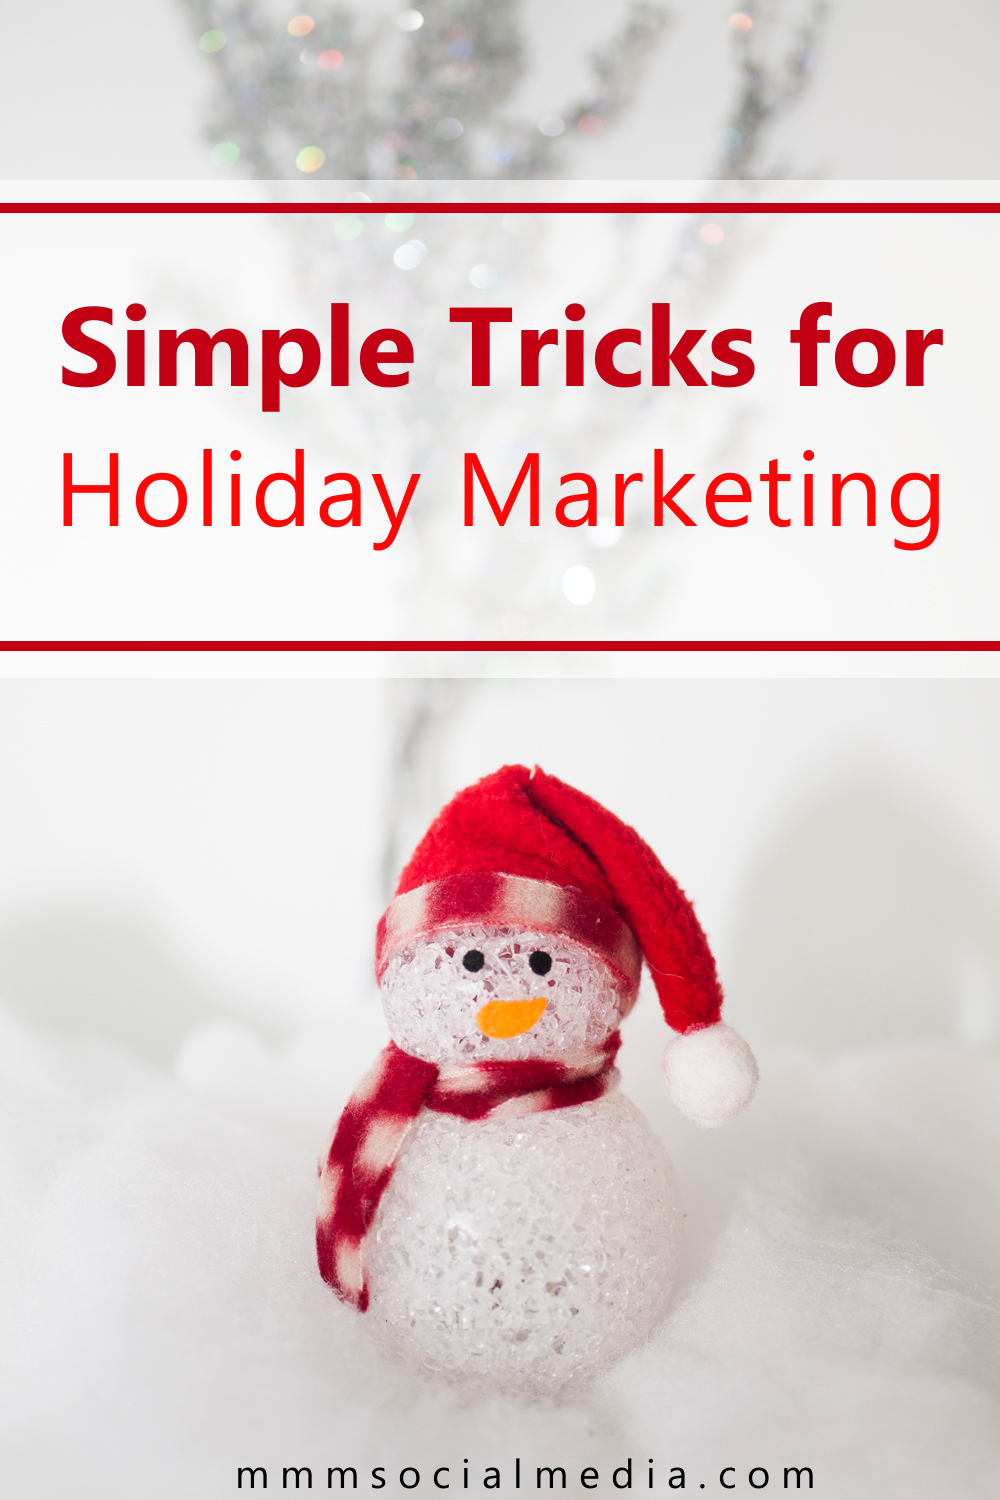 Simple Tricks for Holiday Marketing